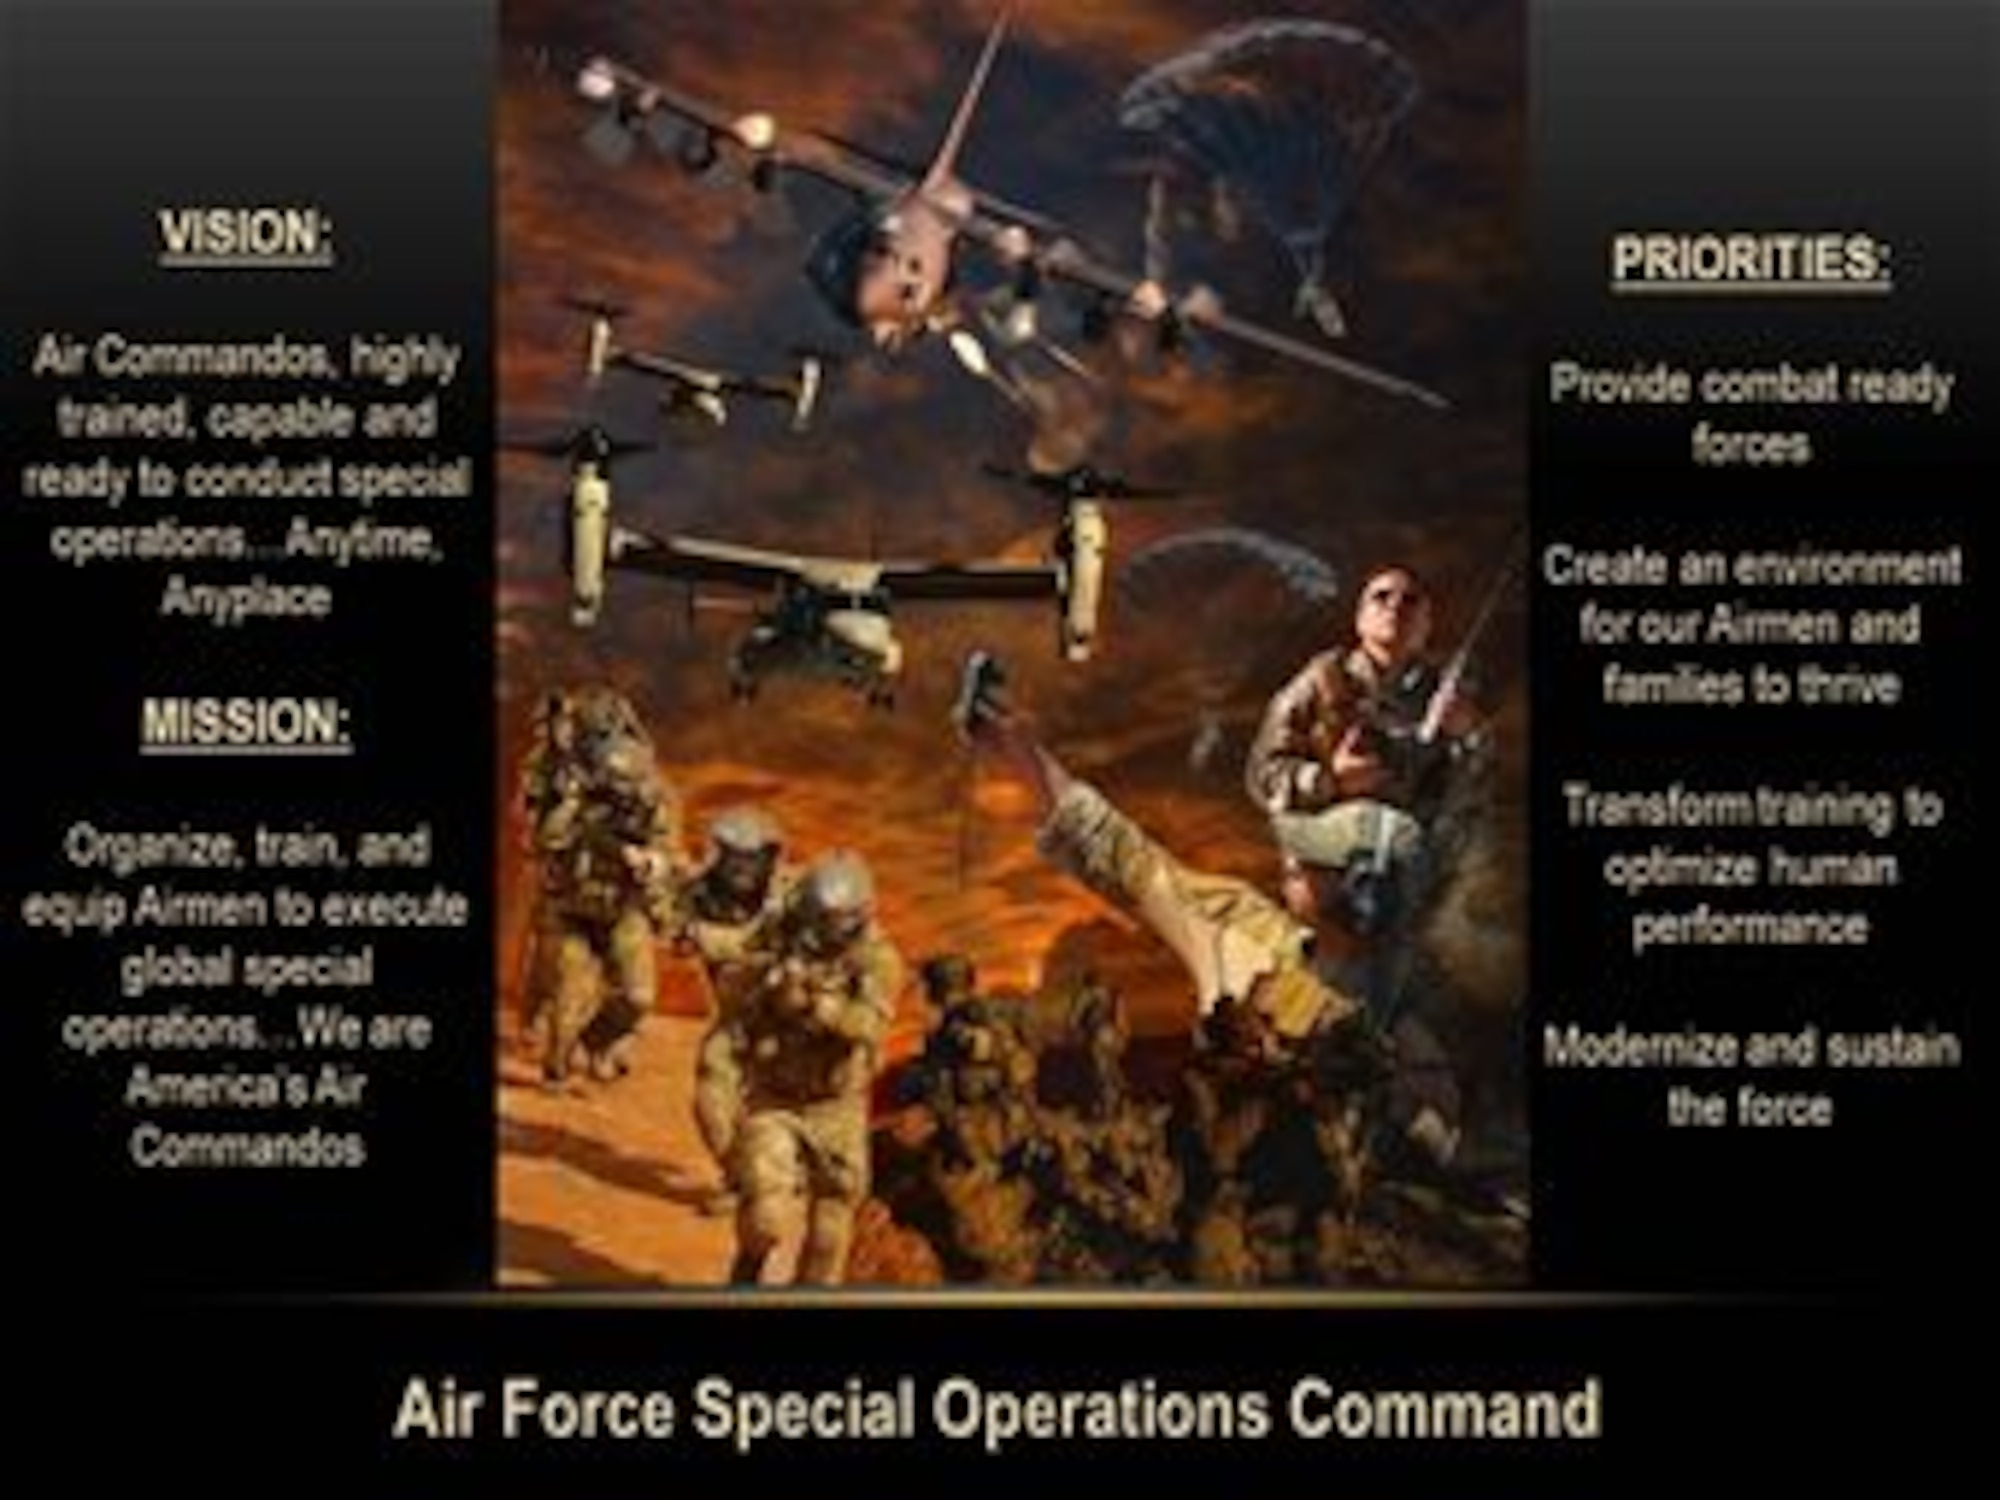 AFSOC mission, vision and priorities